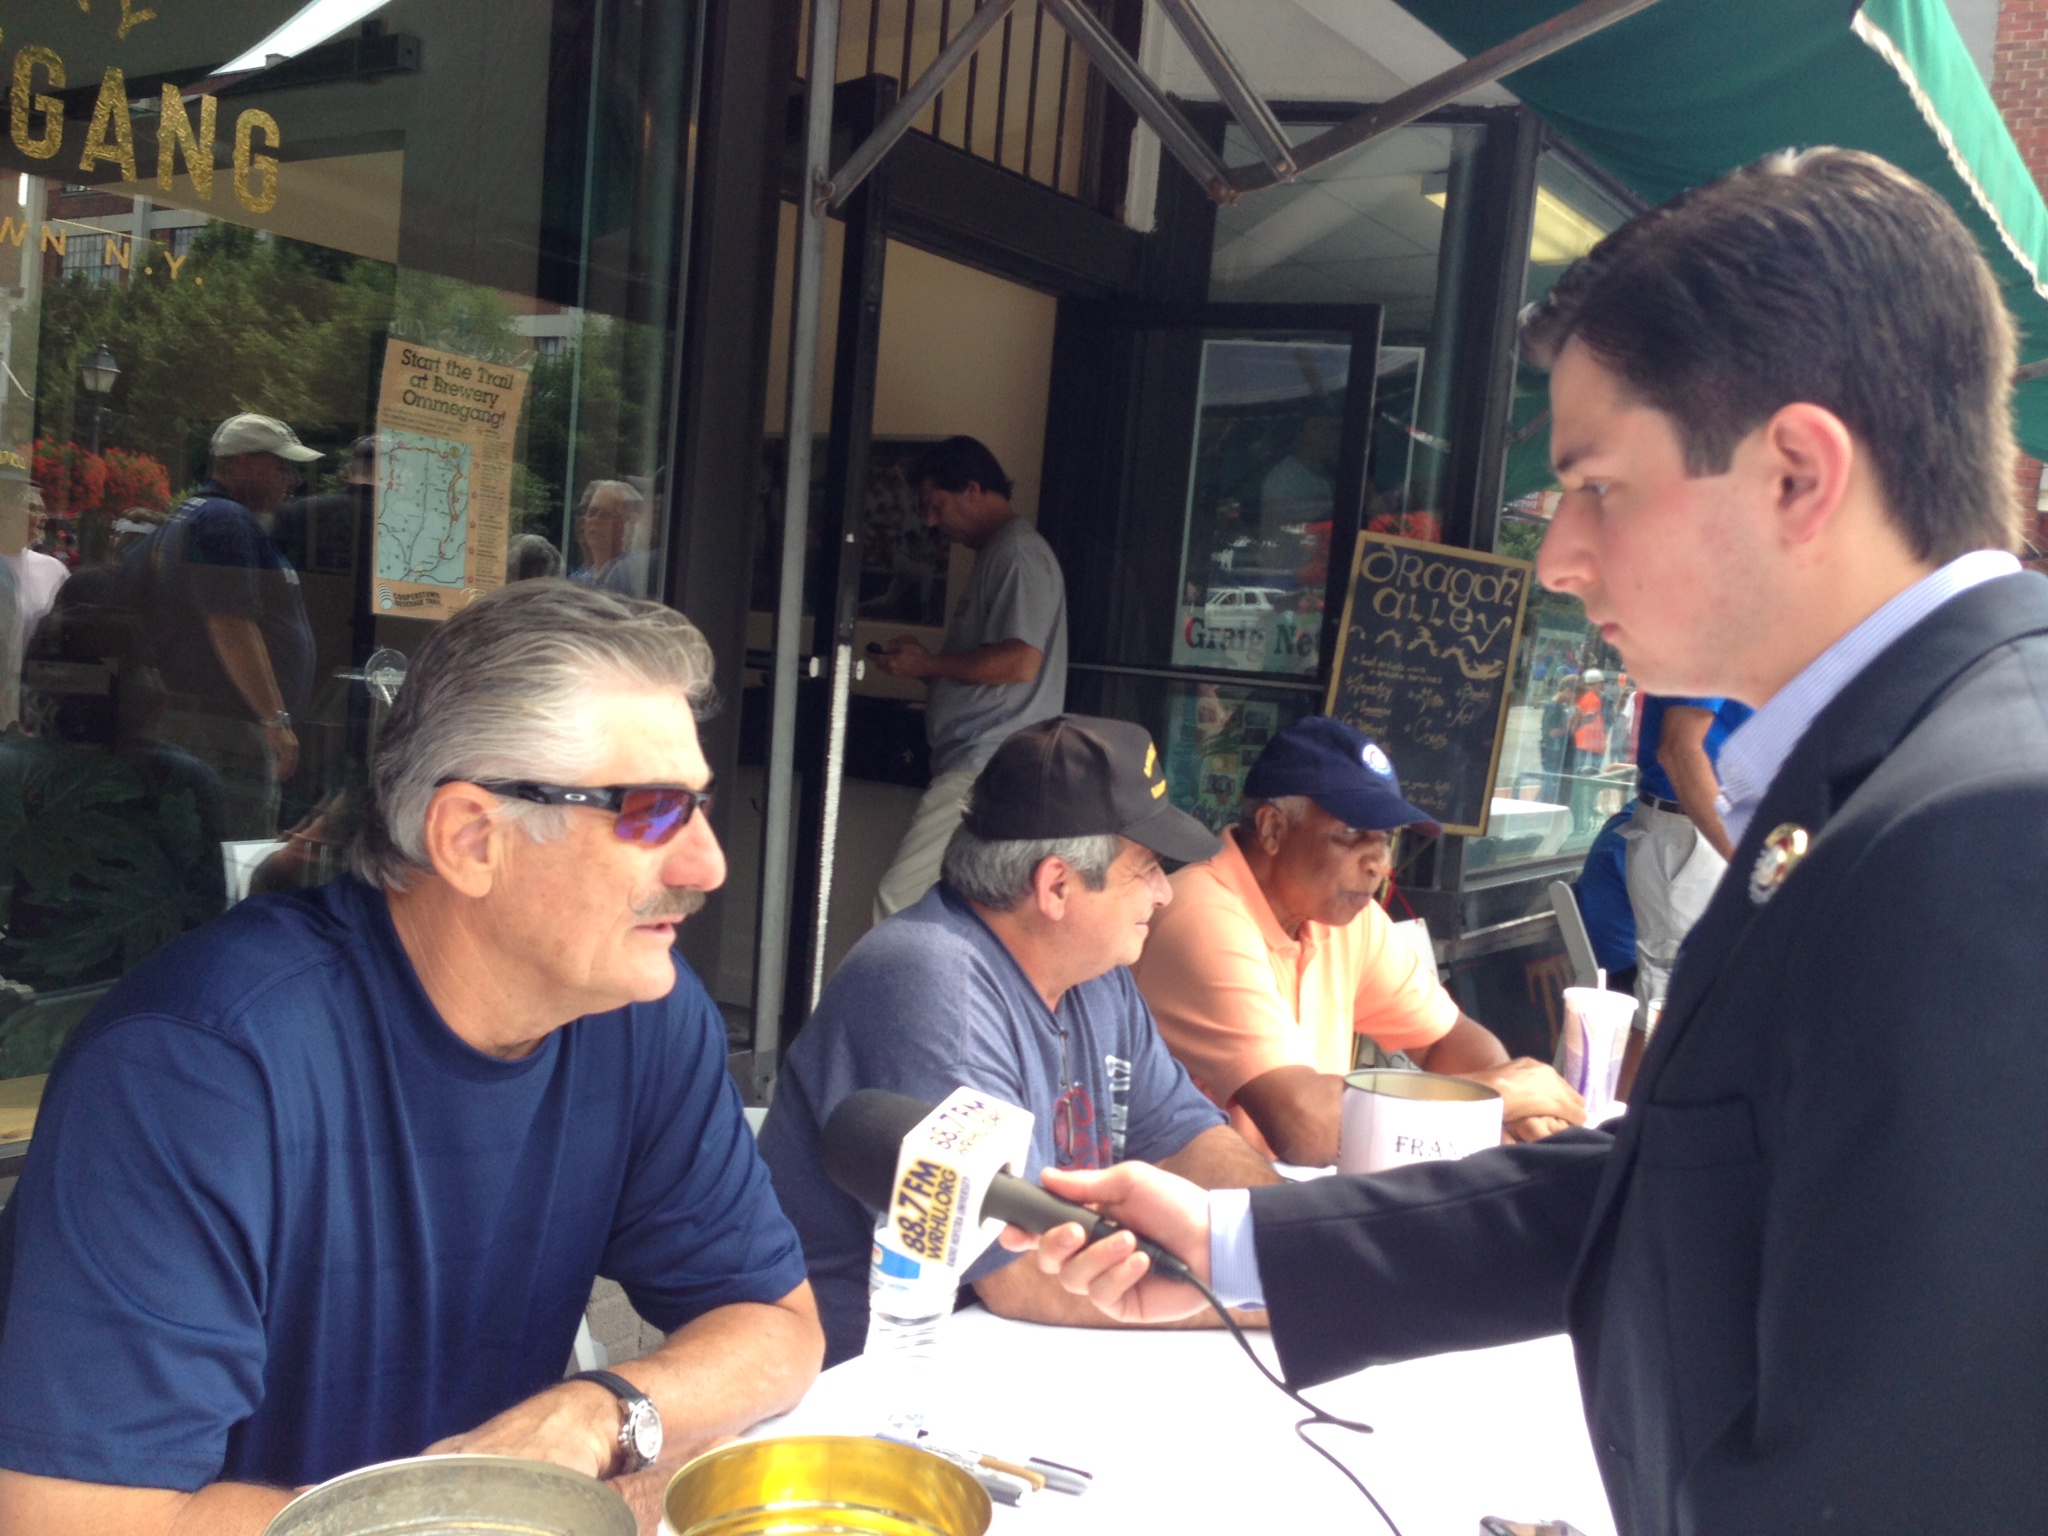 Neil A. Carousso (right) interviews Hall of Fame pitcher Rollie Fingers in Cooperstown, NY